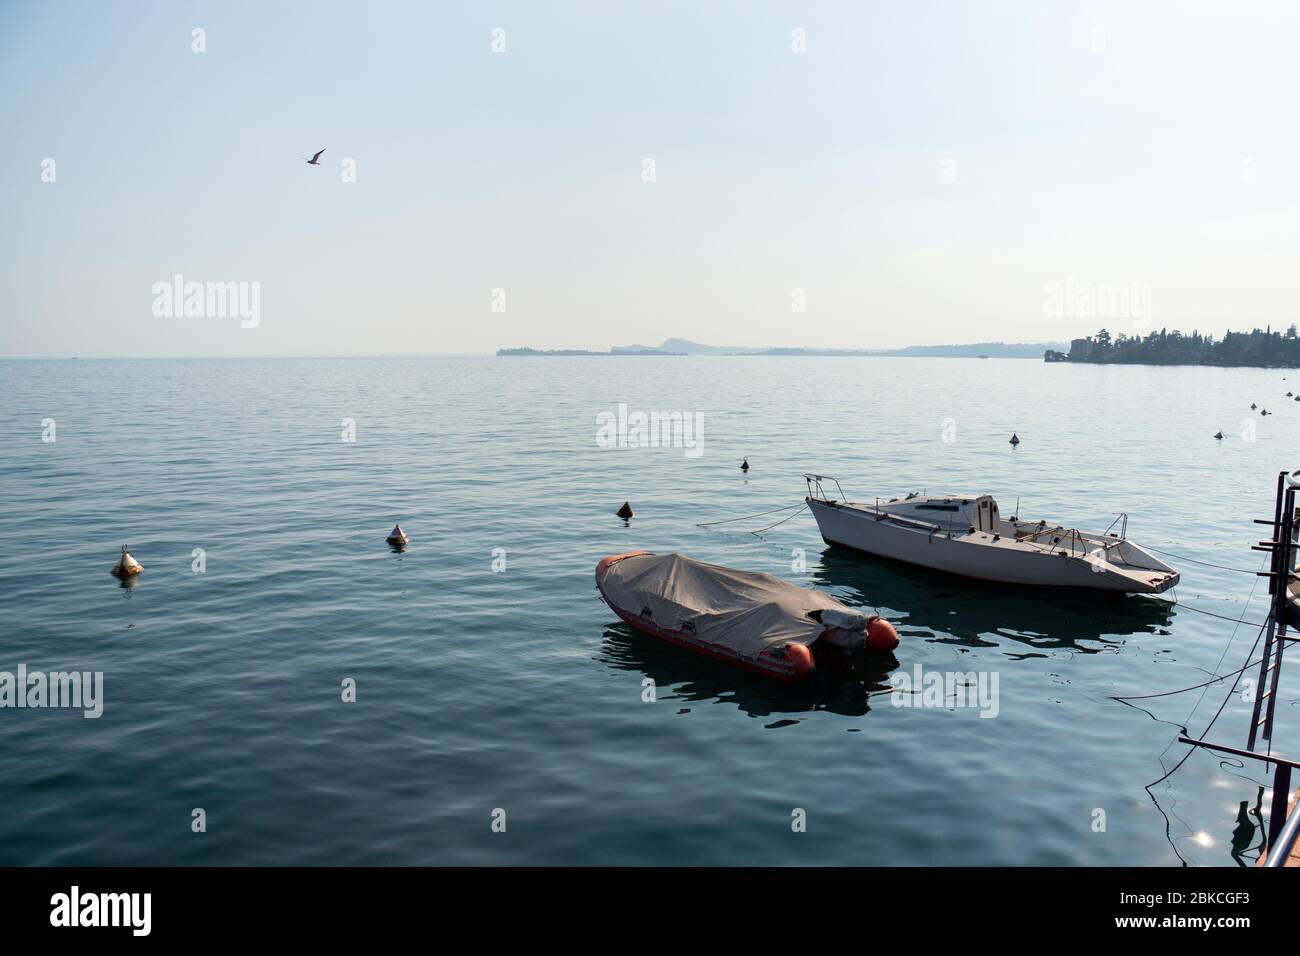 Two boats and silent water surface. Warm September day at lake Garda, northern Italy. Stock Photo